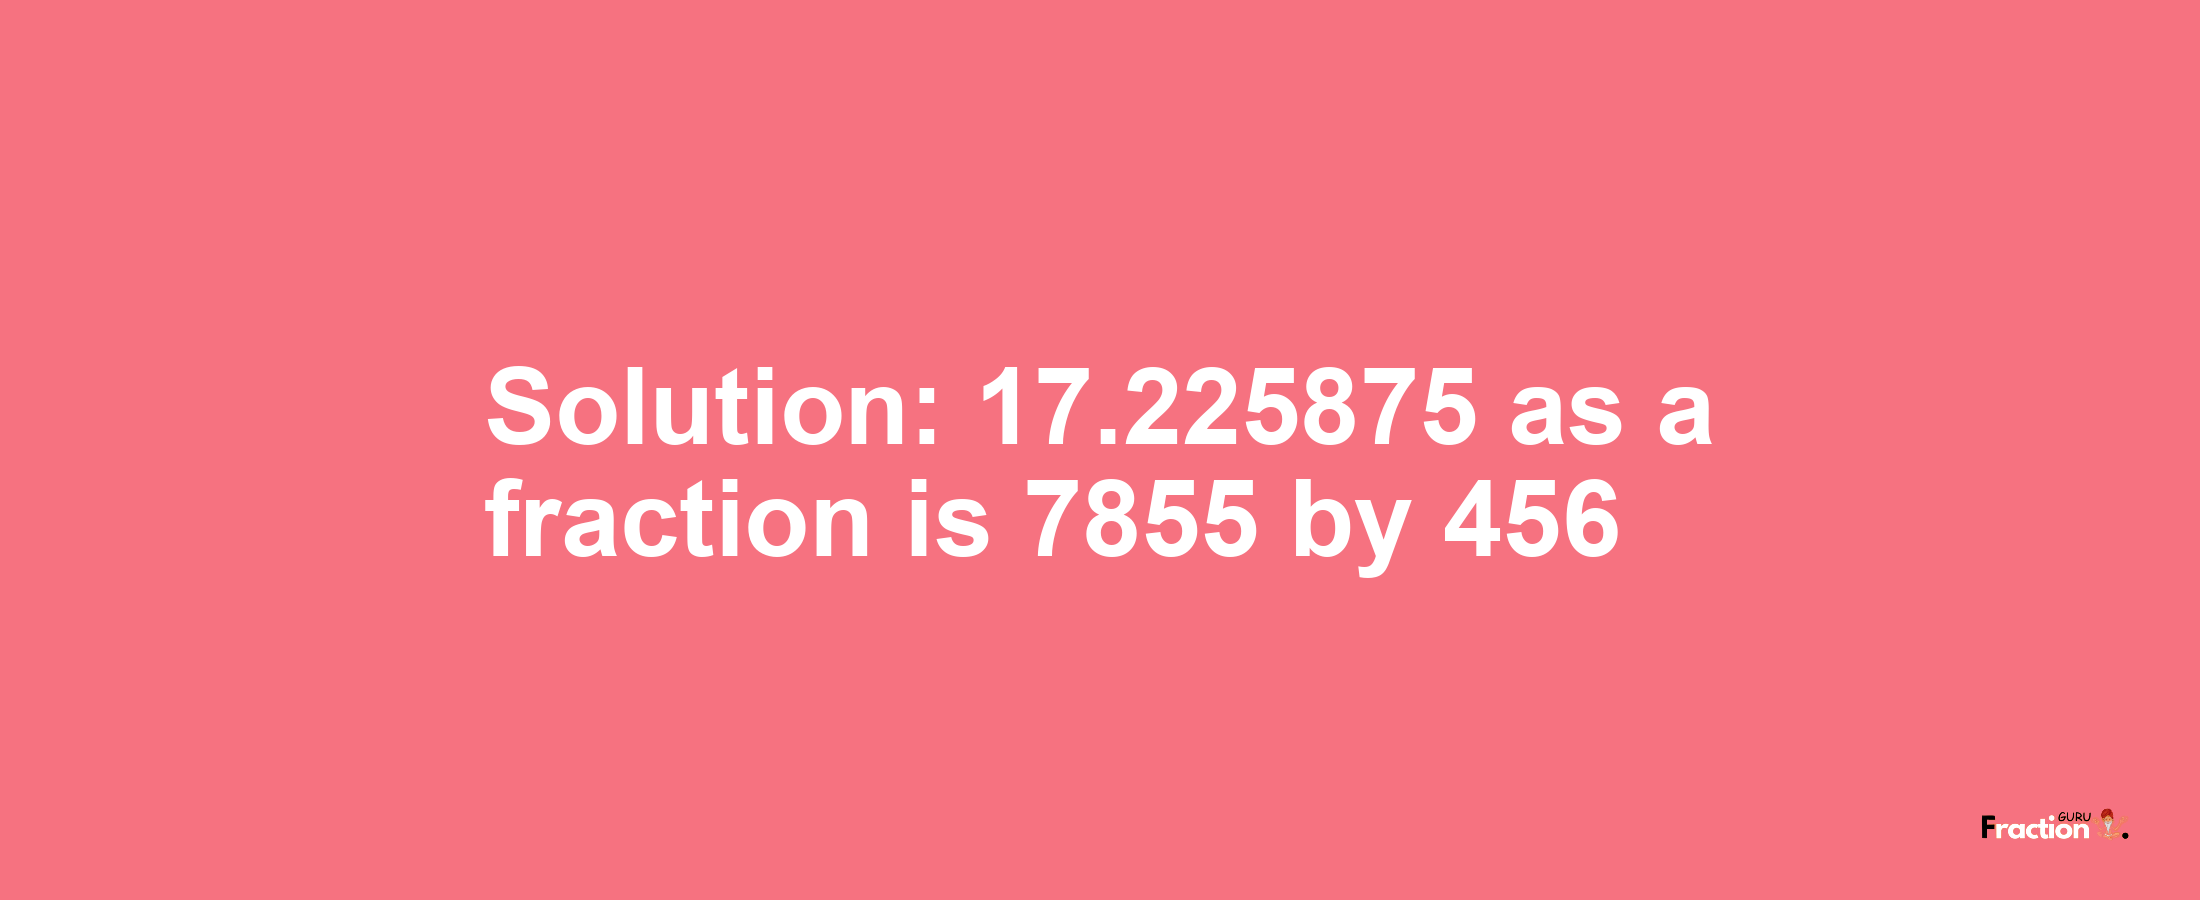 Solution:17.225875 as a fraction is 7855/456